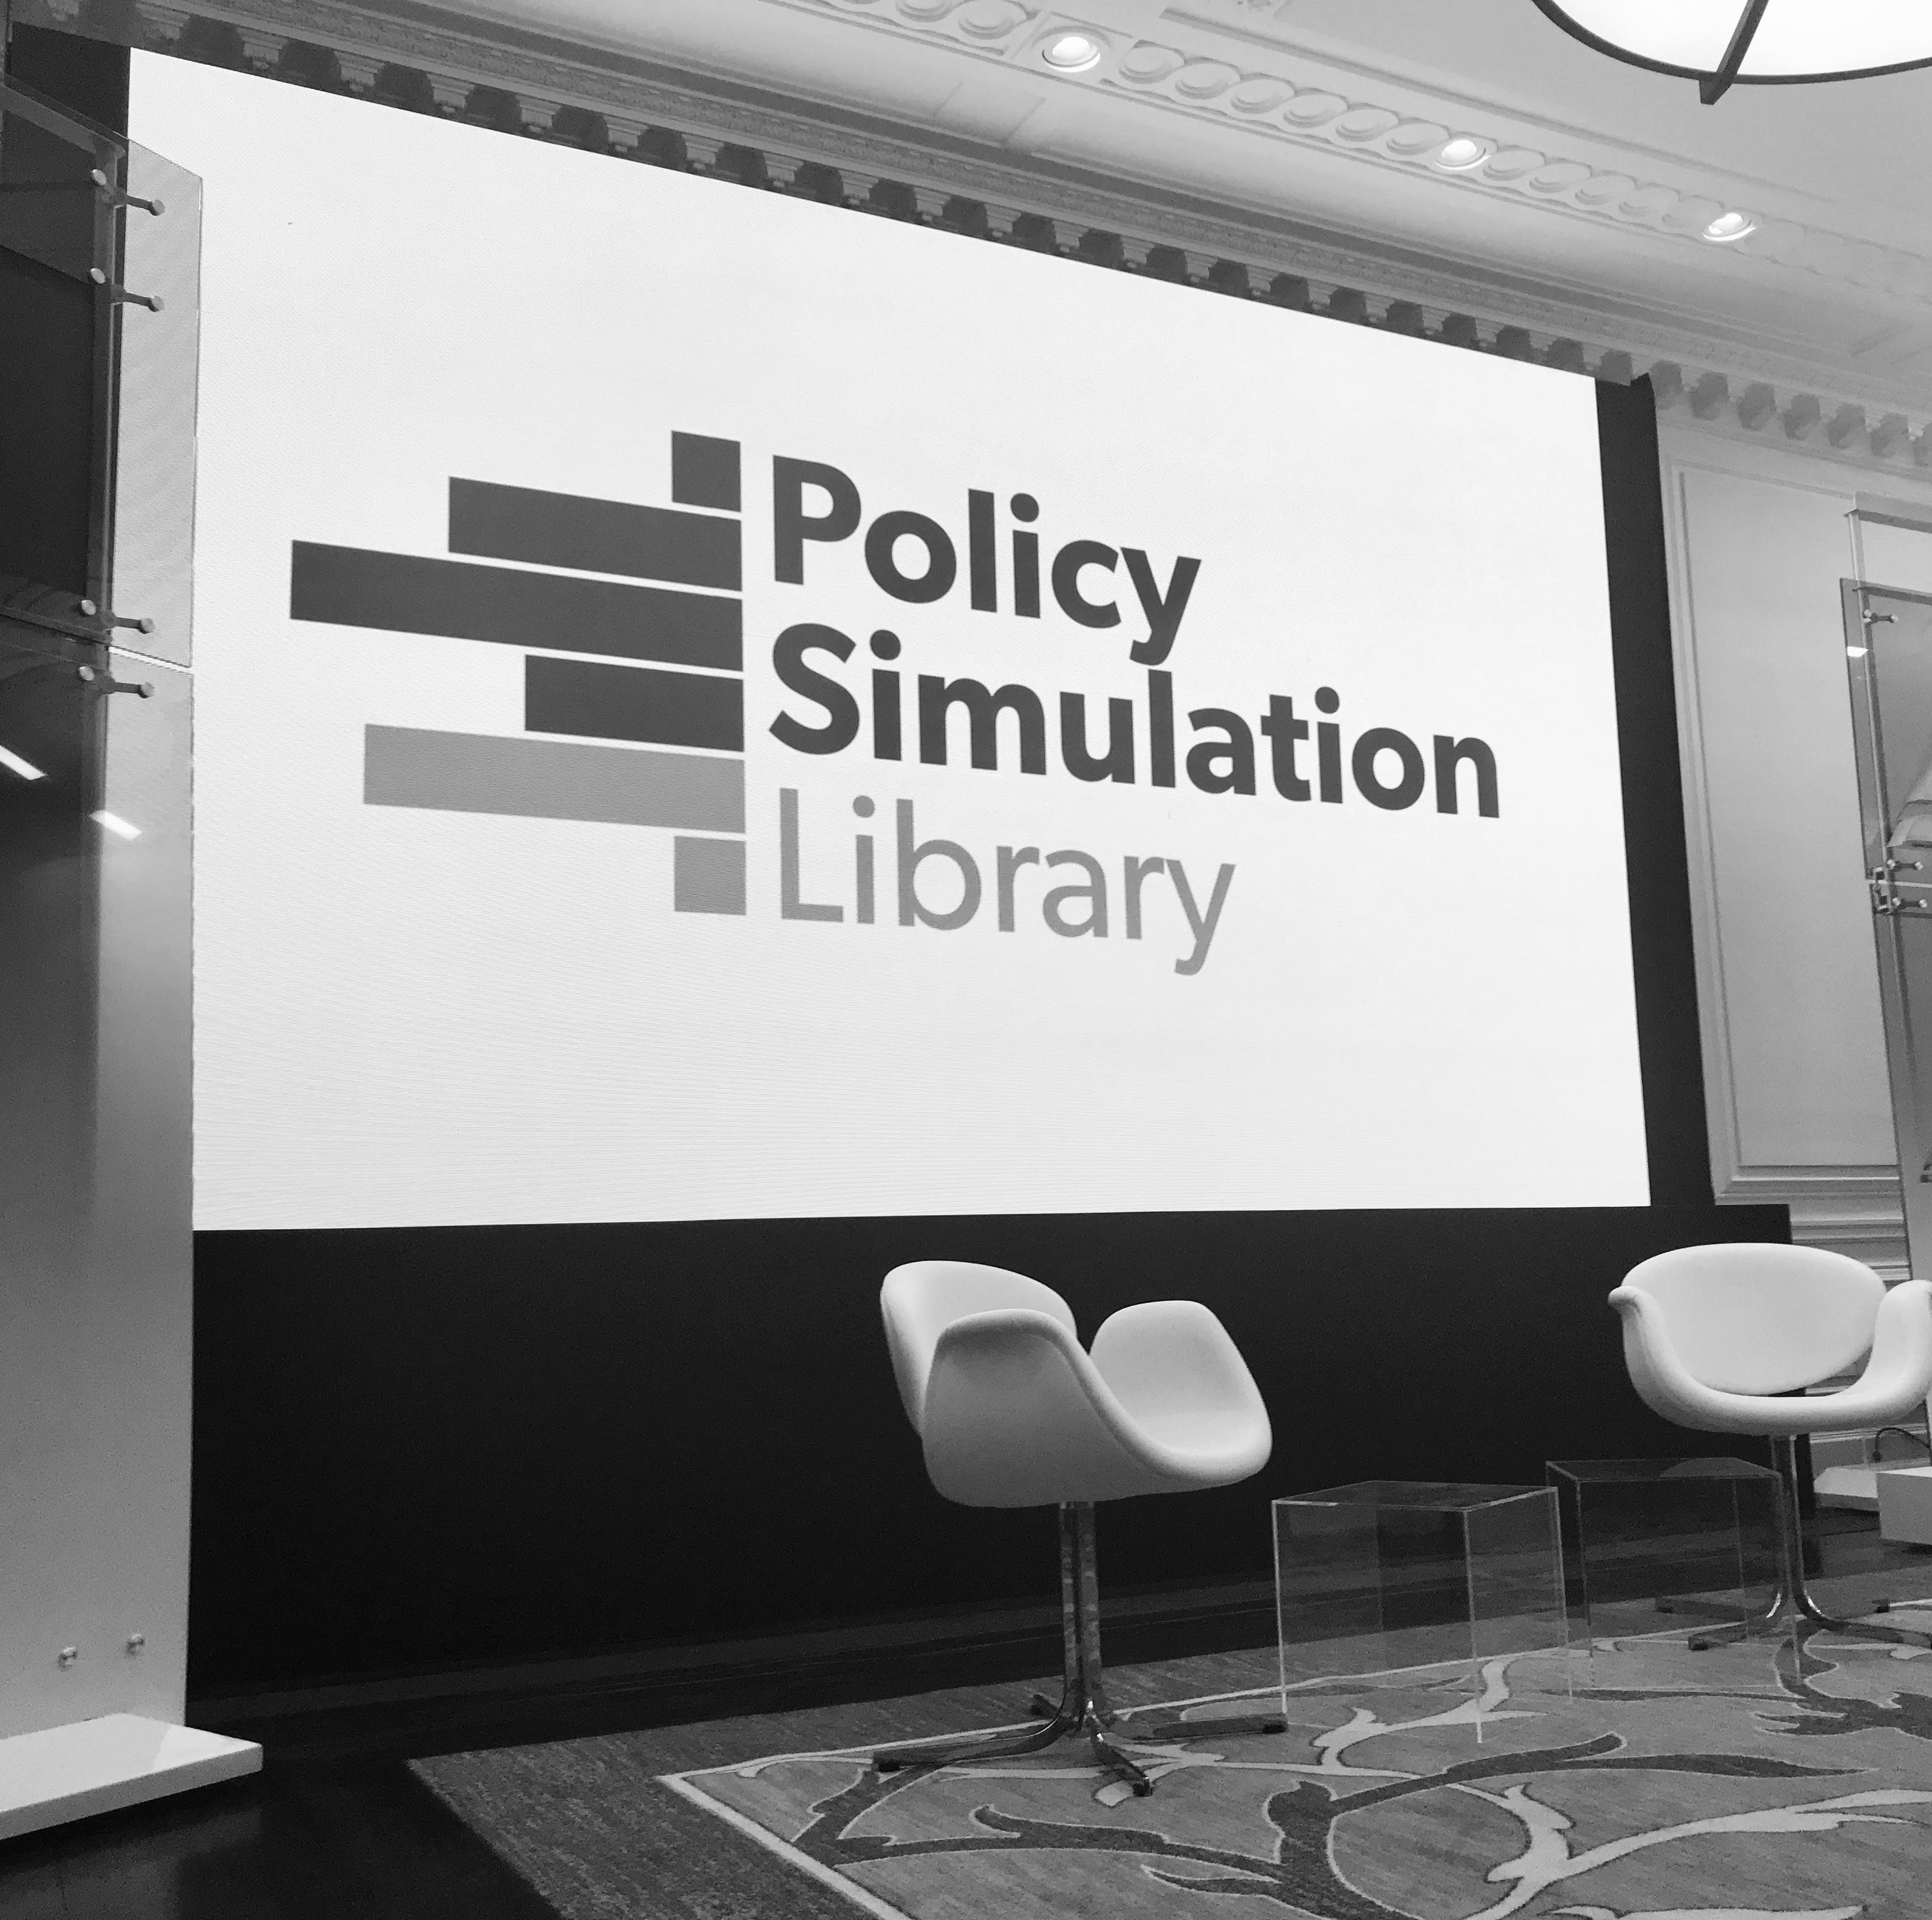 Policy Simulation Library